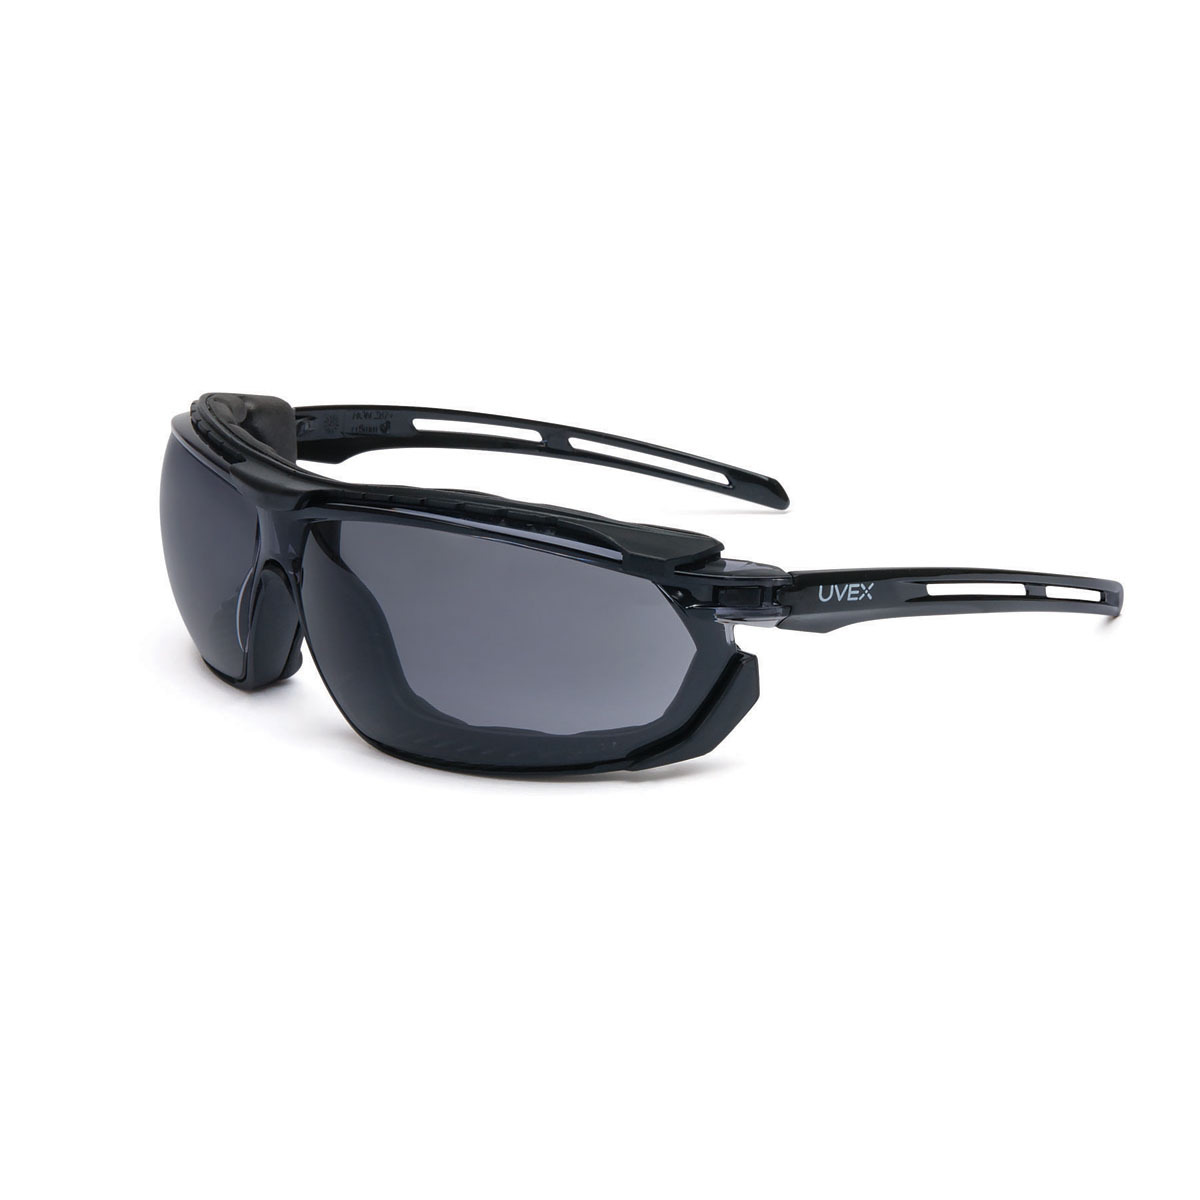 Honeywell Uvex Tirade™ Black Safety Glasses With Gray Anti-Fog Lens (Availability restrictions apply.)